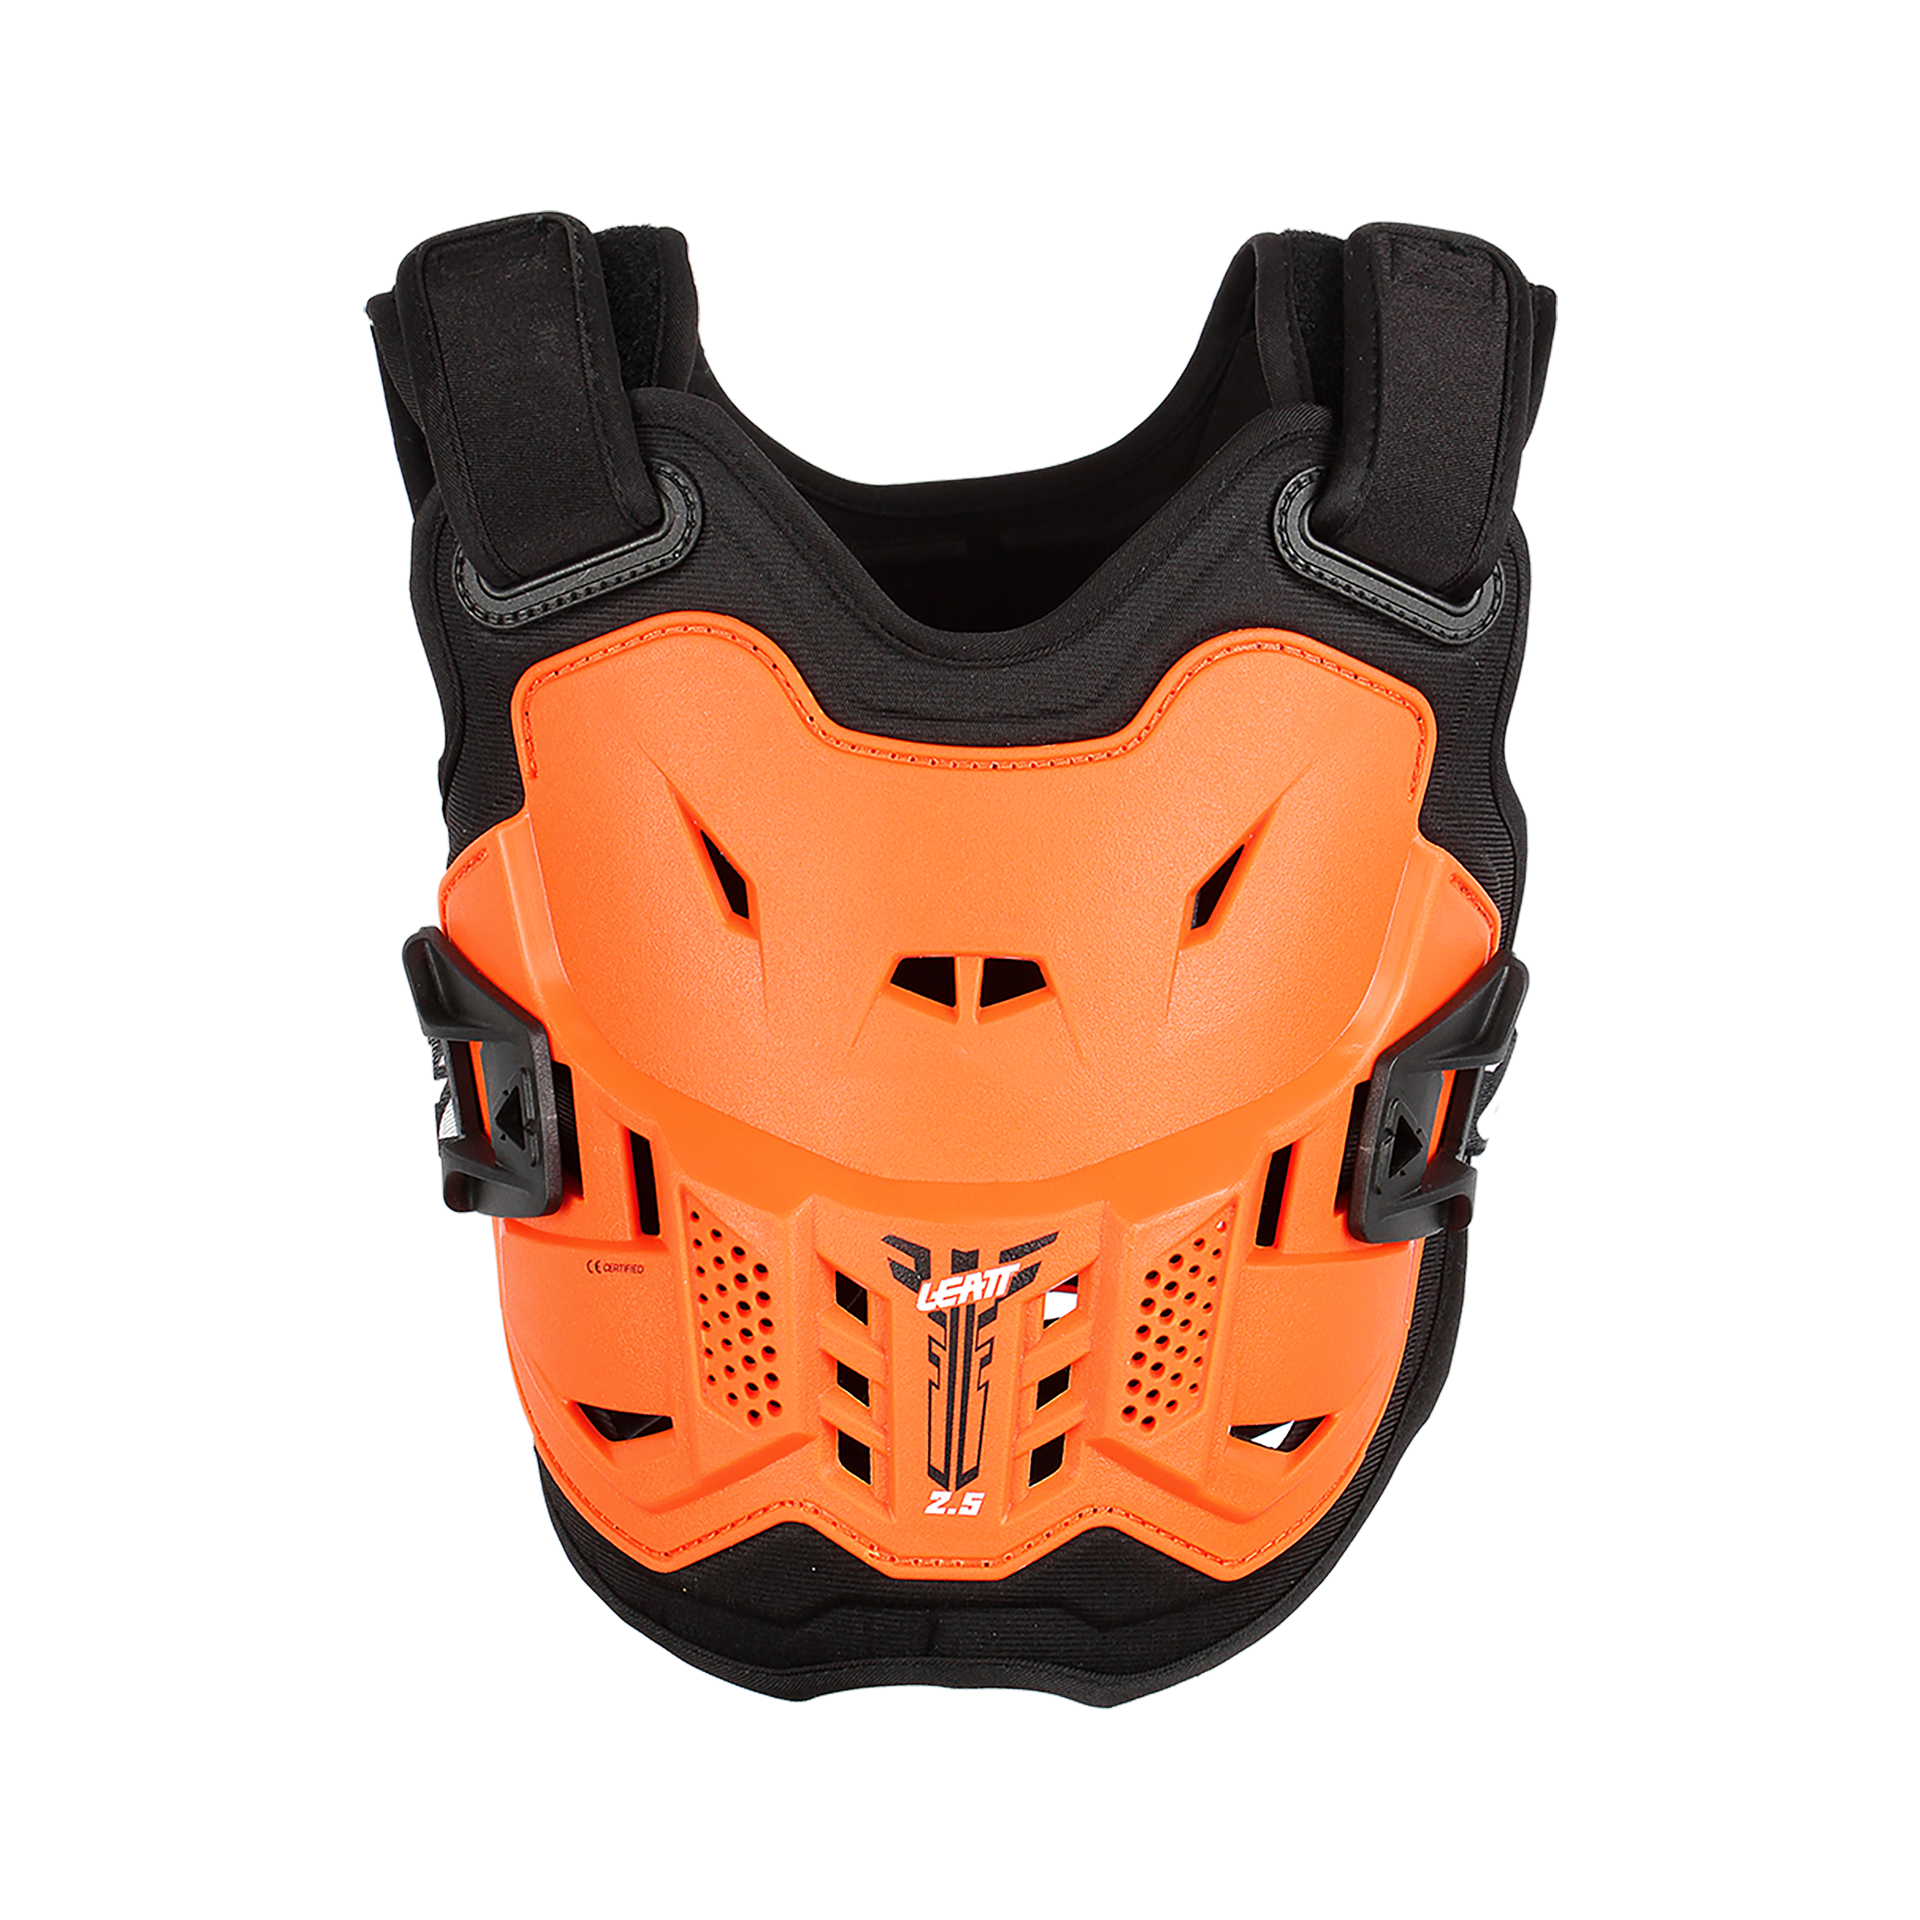 Leatt 2.5 Youth Chest Protector – Langston Motorsports